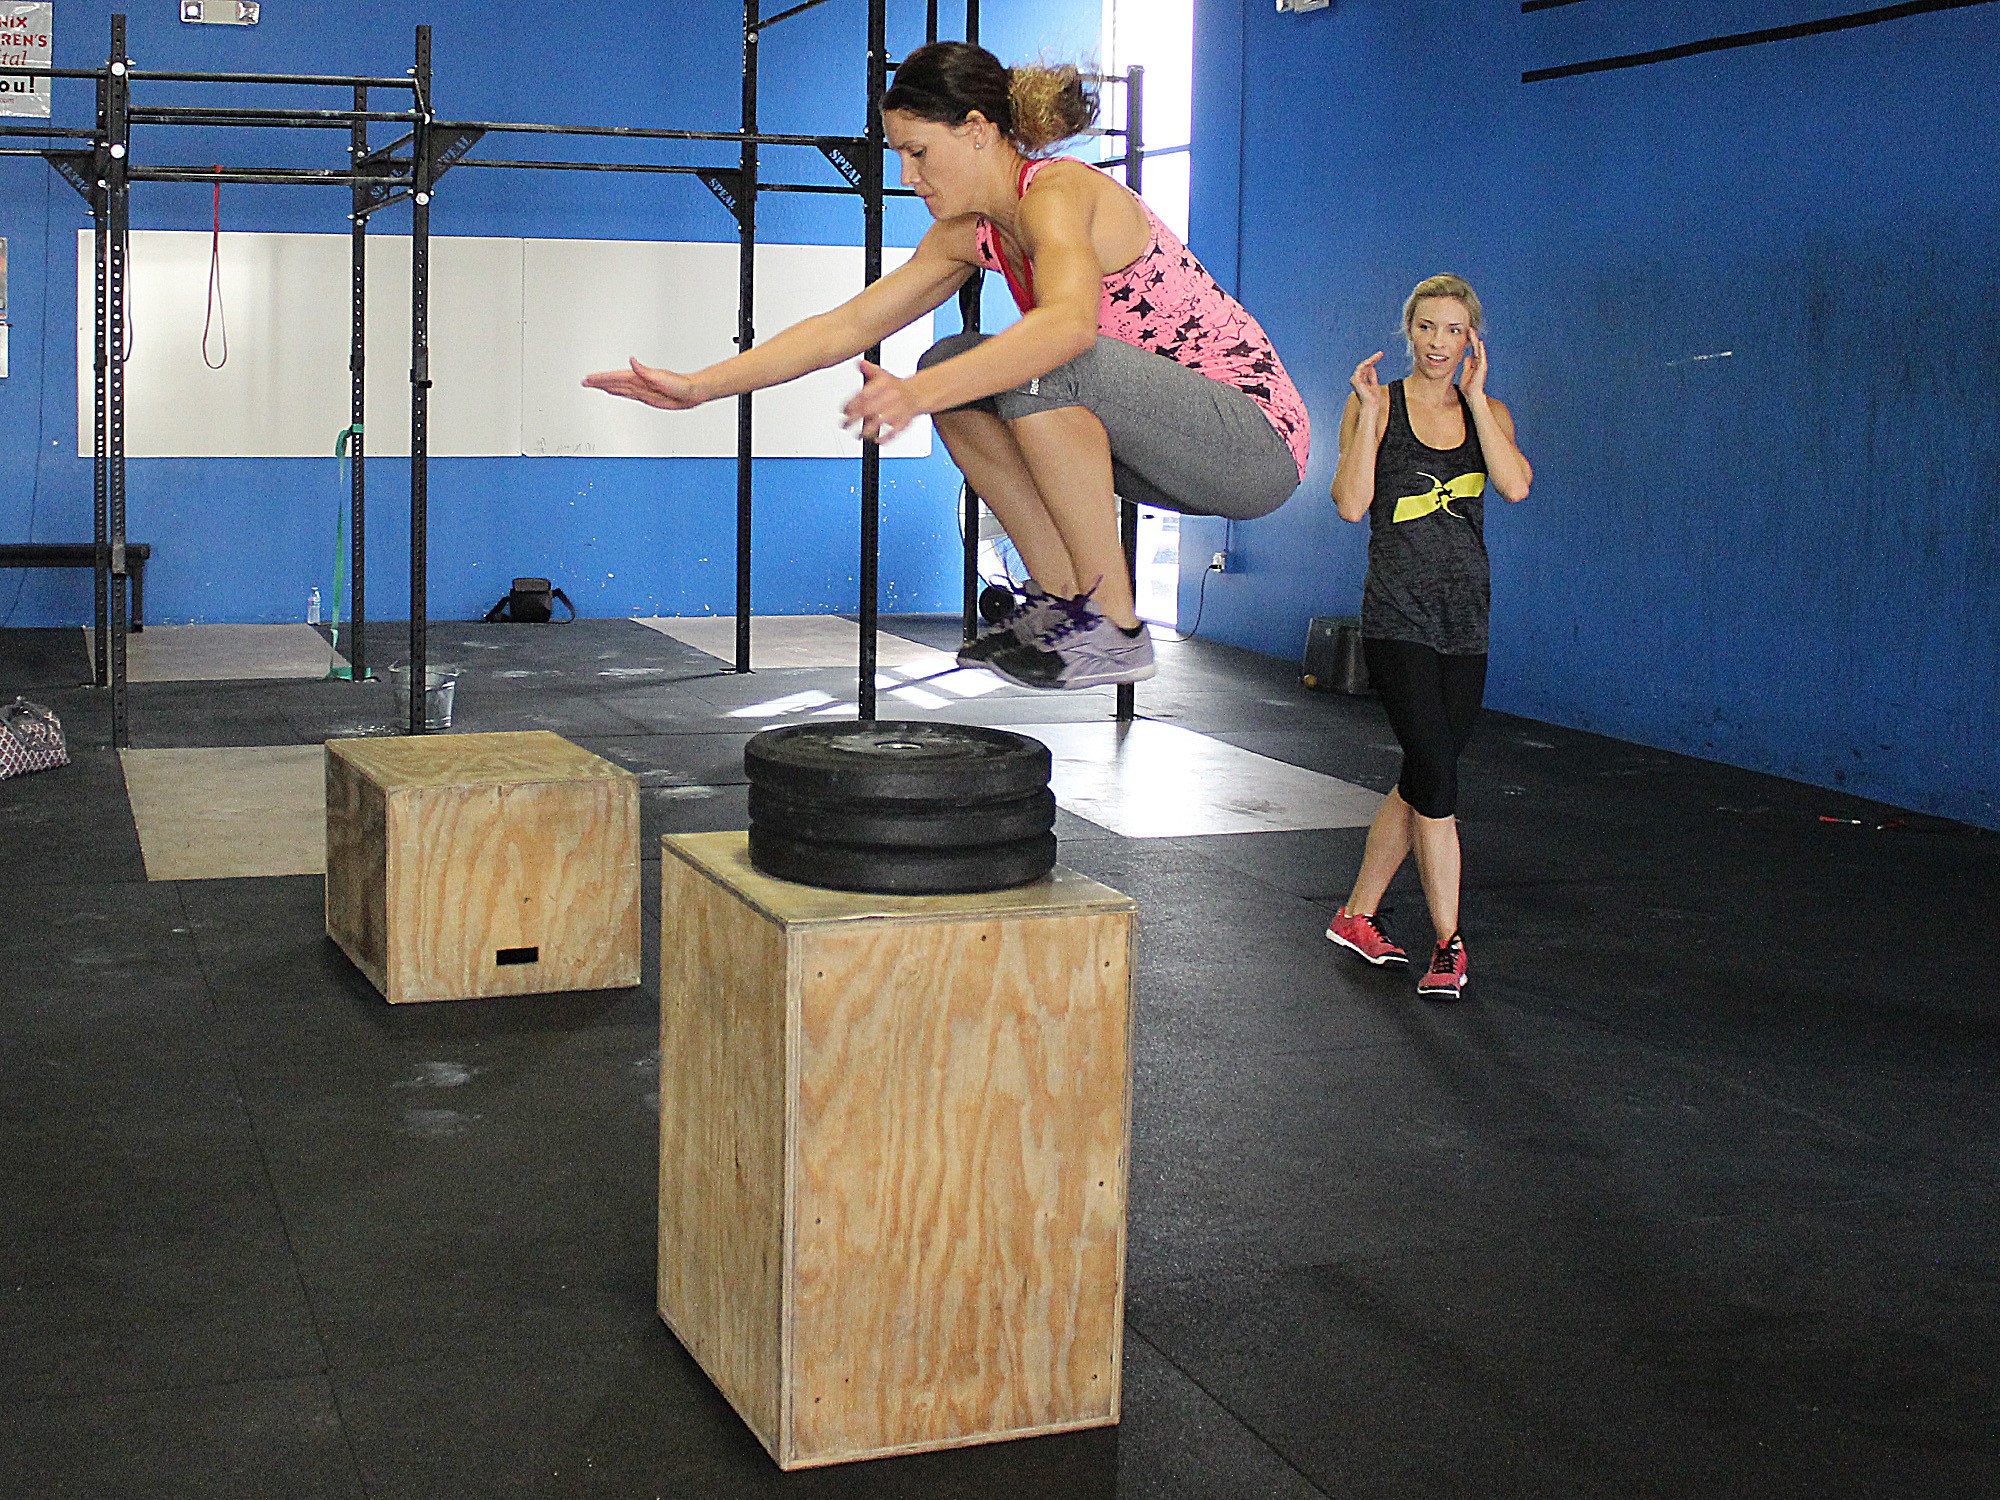 15 Minute Box jump crossfit workout for Build Muscle